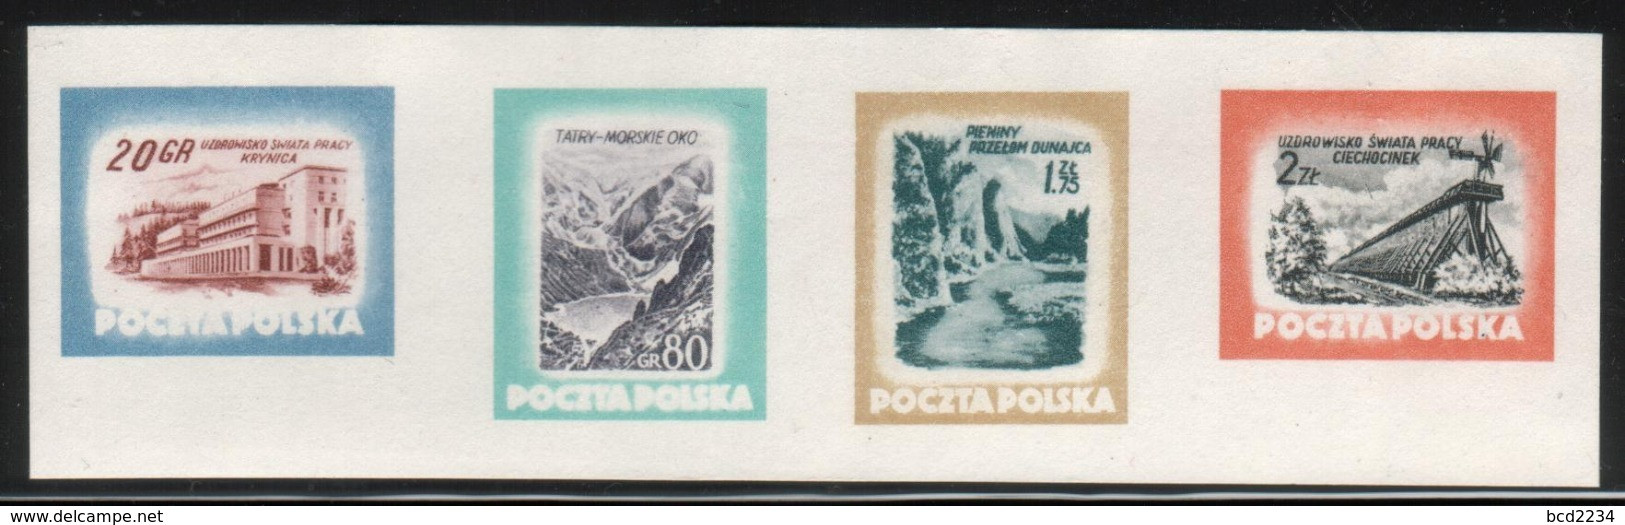 POLAND 1953 TOURISM TOURIST SERIES VIEWS COMPLETE SET IN A STRIP OF COLOUR PROOFS NHM Mountains Lakes Health Spa Resorts - Proeven & Herdruk